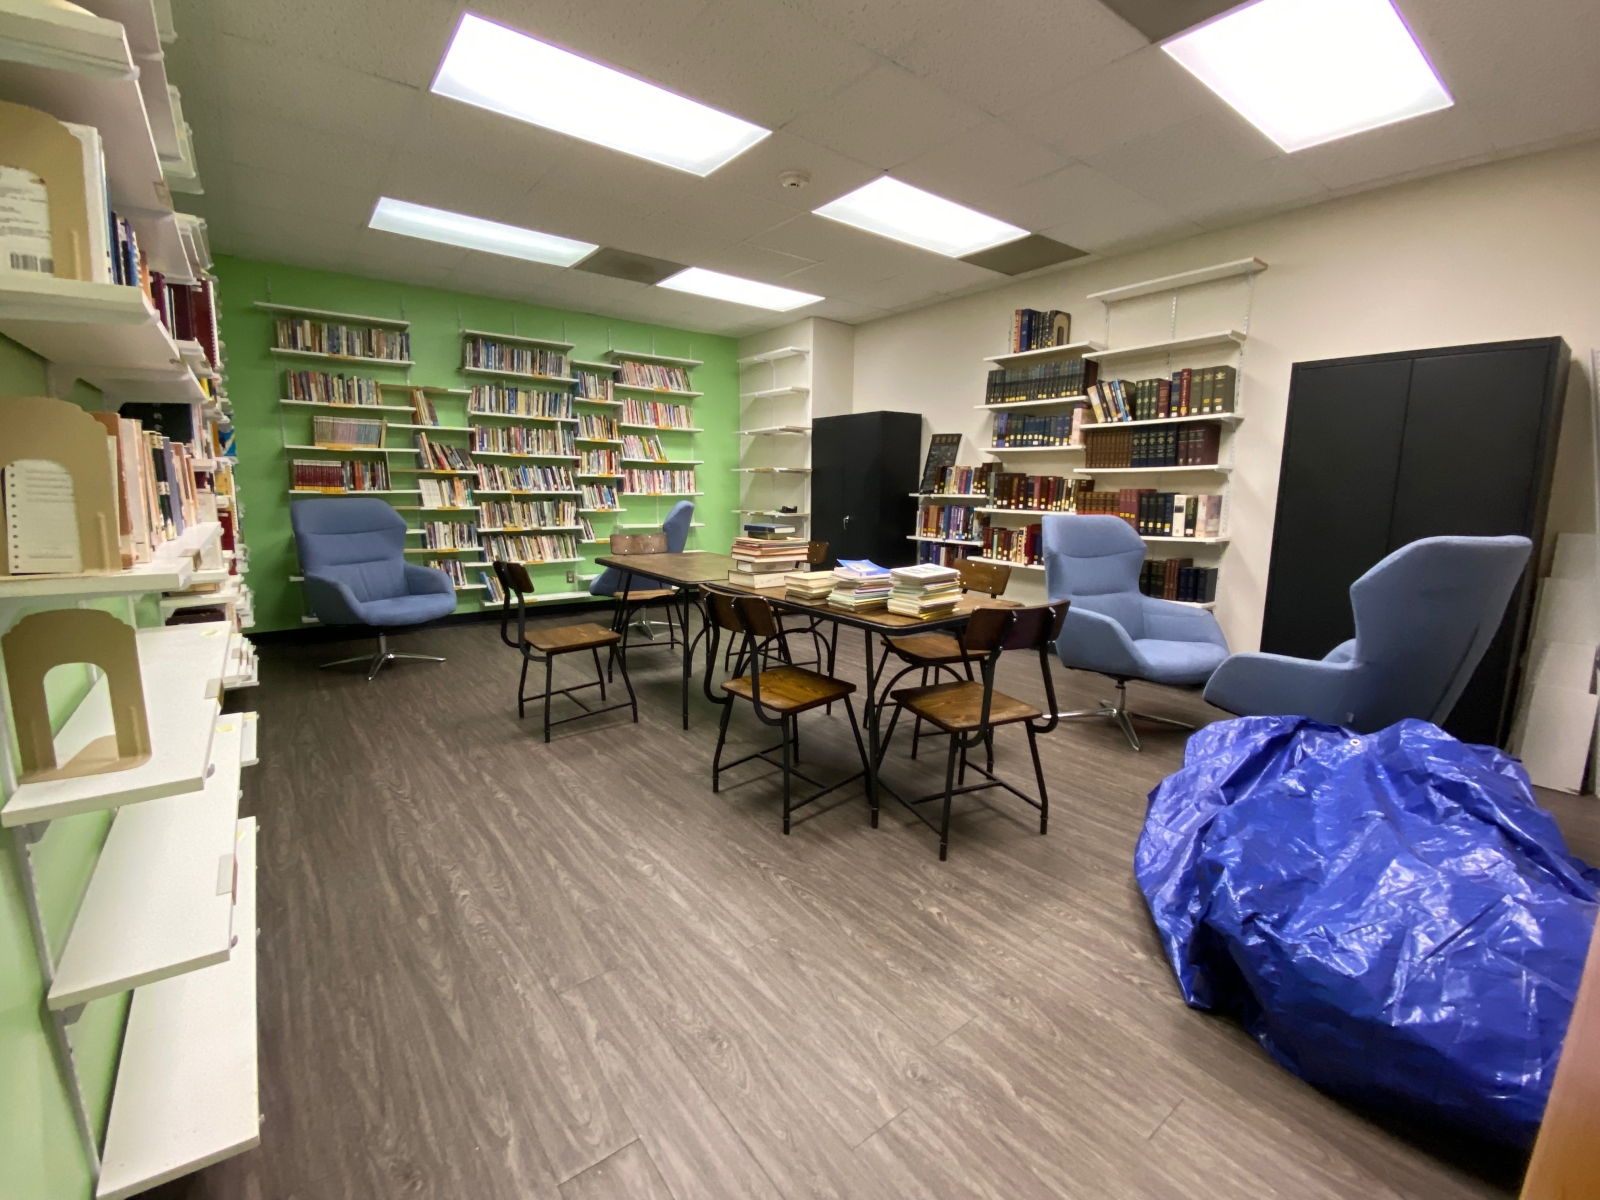 The library has several bookshelves of books, reading chairs, bean bags, and a table with chairs around it.